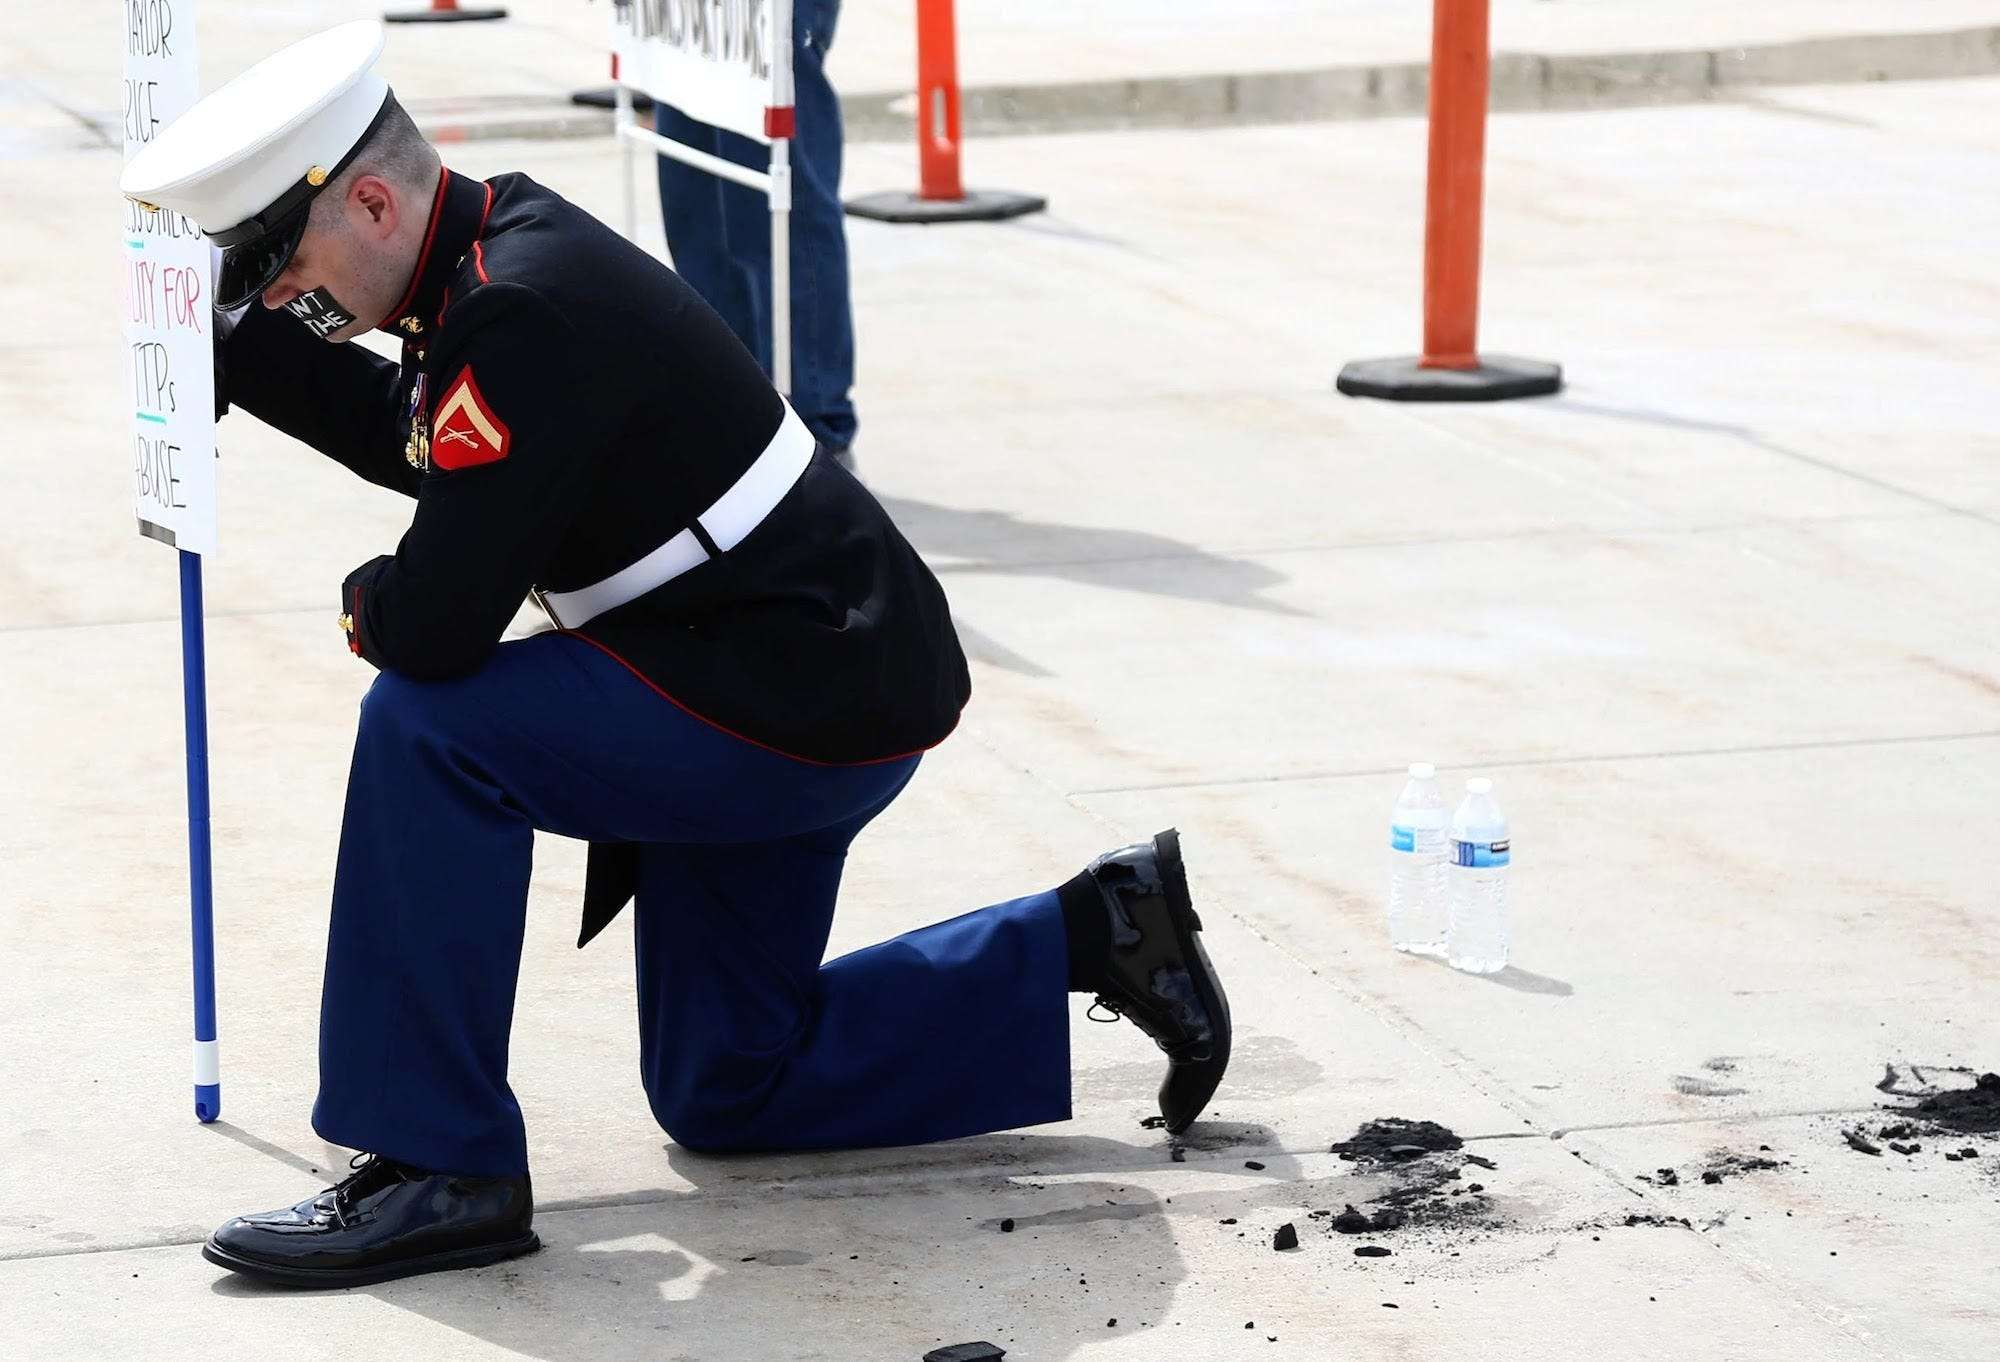 Photos: Utah Marine veteran stands alone at Capitol with 'I can't breathe'  covering mouth